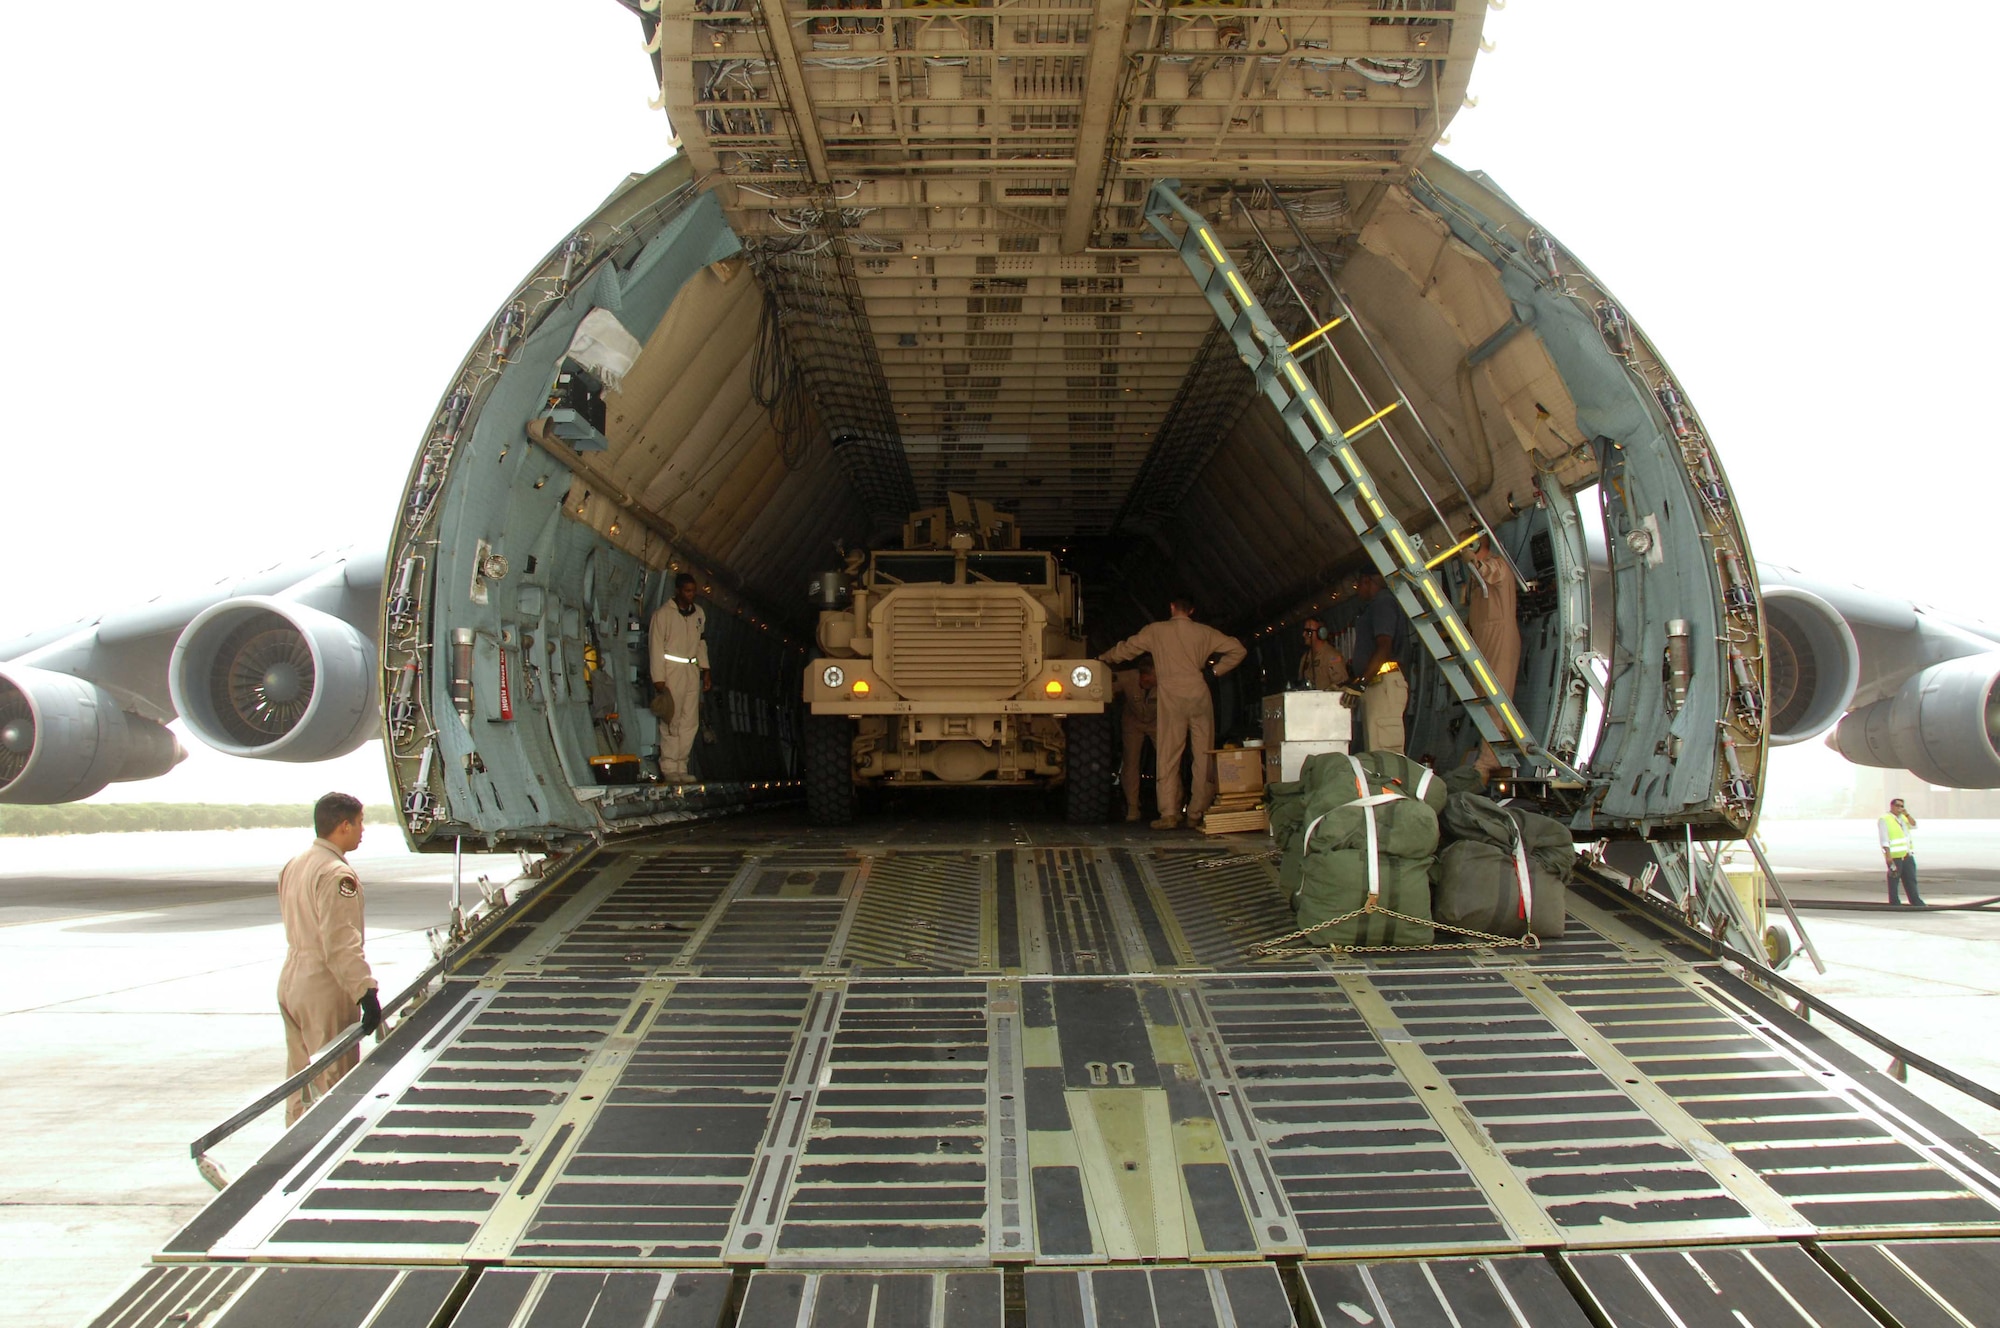 A crew of Team Travis members prepare to unload the 10,000th mine-resistant, ambush-protected vehicle in Southwest Asia recently. Since the MRAPs introduction in 2007, Air Mobility Command Airmen have worked continuously to deliver the vehicles to troops supporting Operations Iraqi and Enduring Freedom. (U.S. Air Force photo)